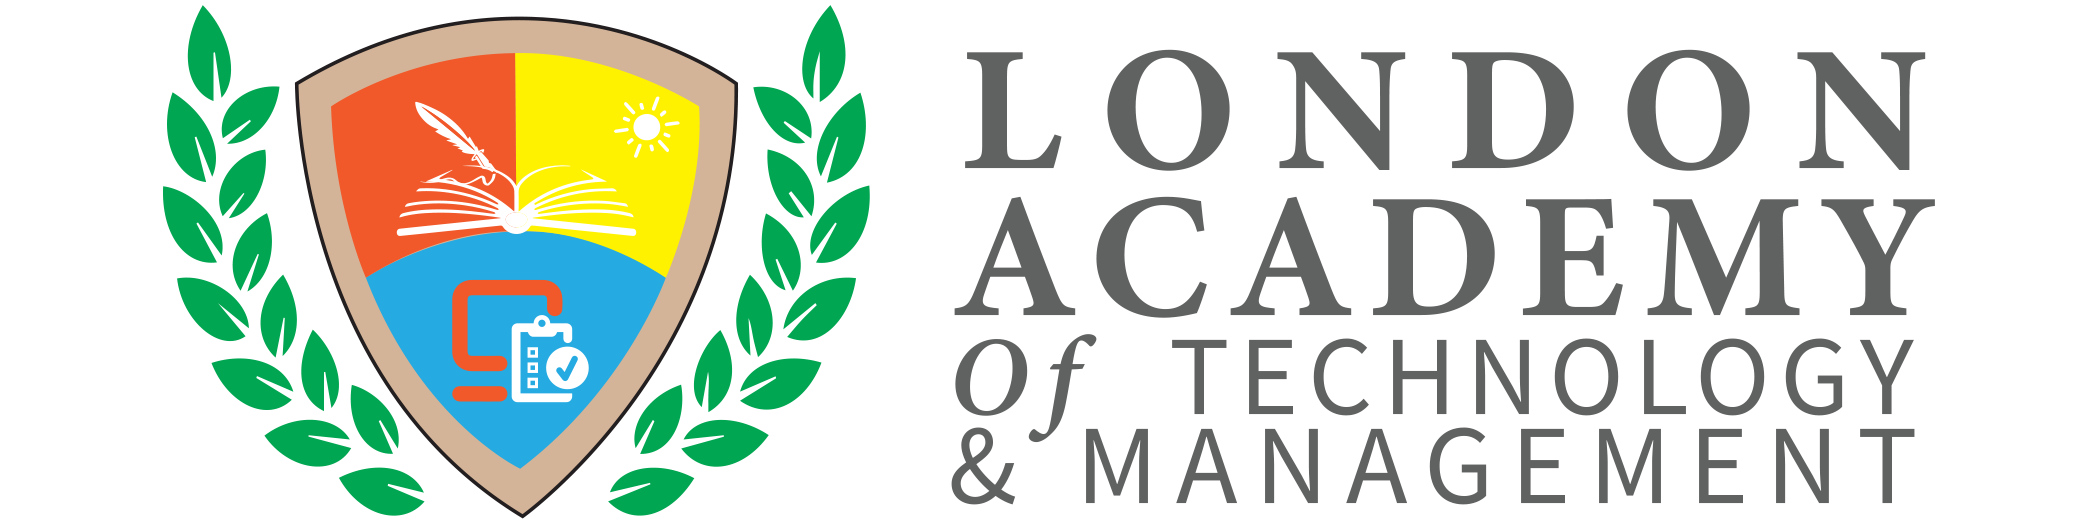 London Academy of Technology and Management